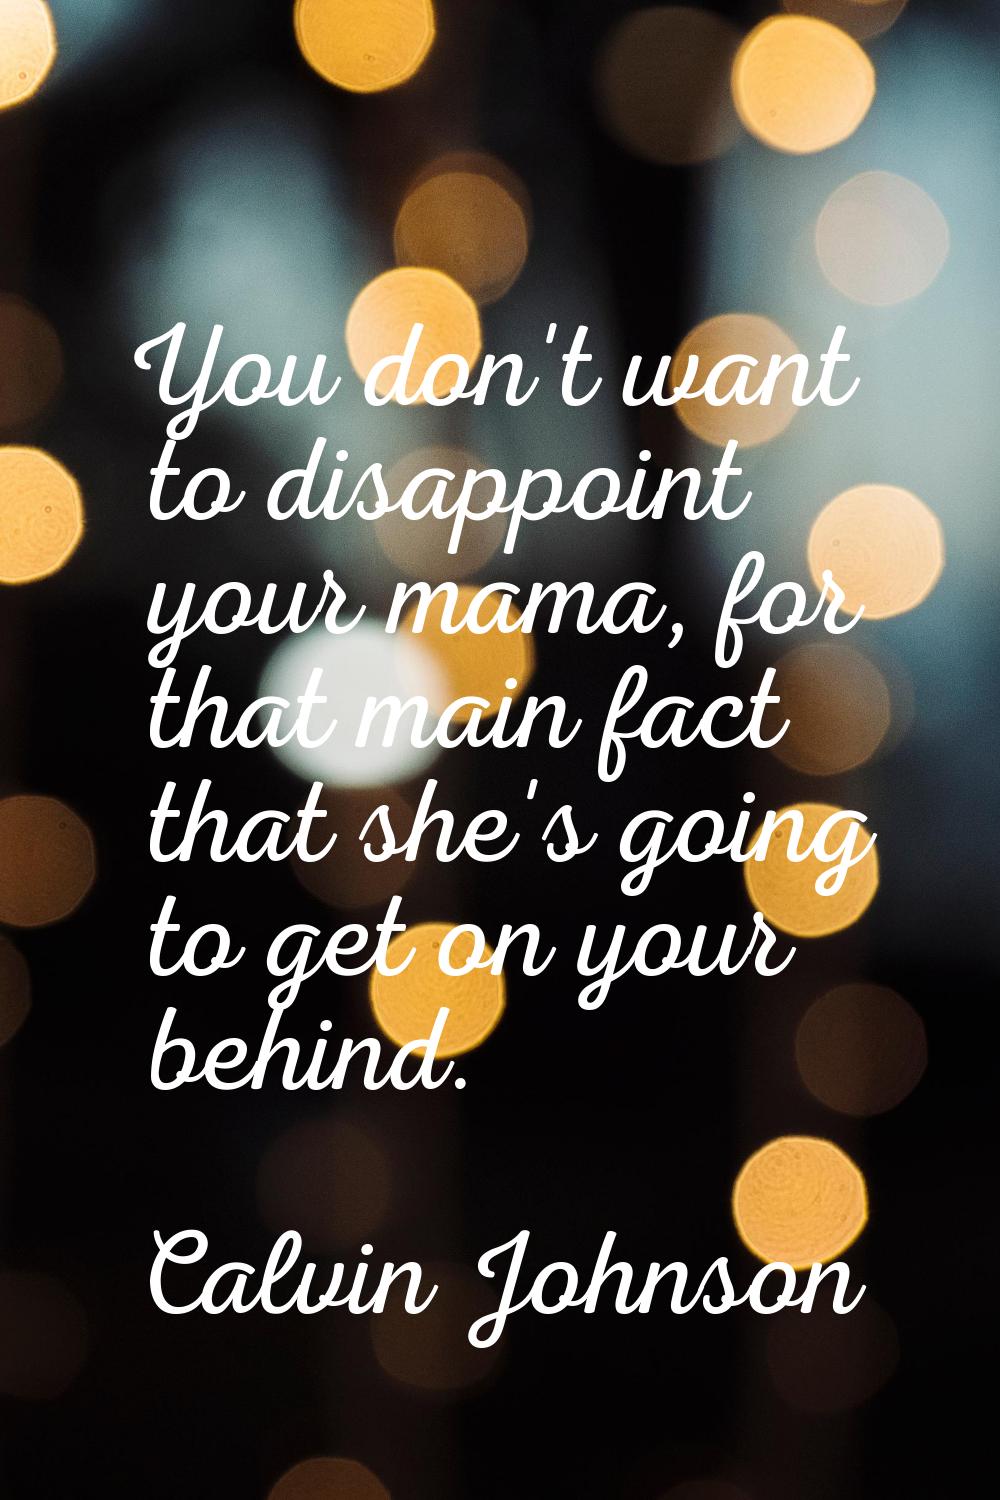 You don't want to disappoint your mama, for that main fact that she's going to get on your behind.